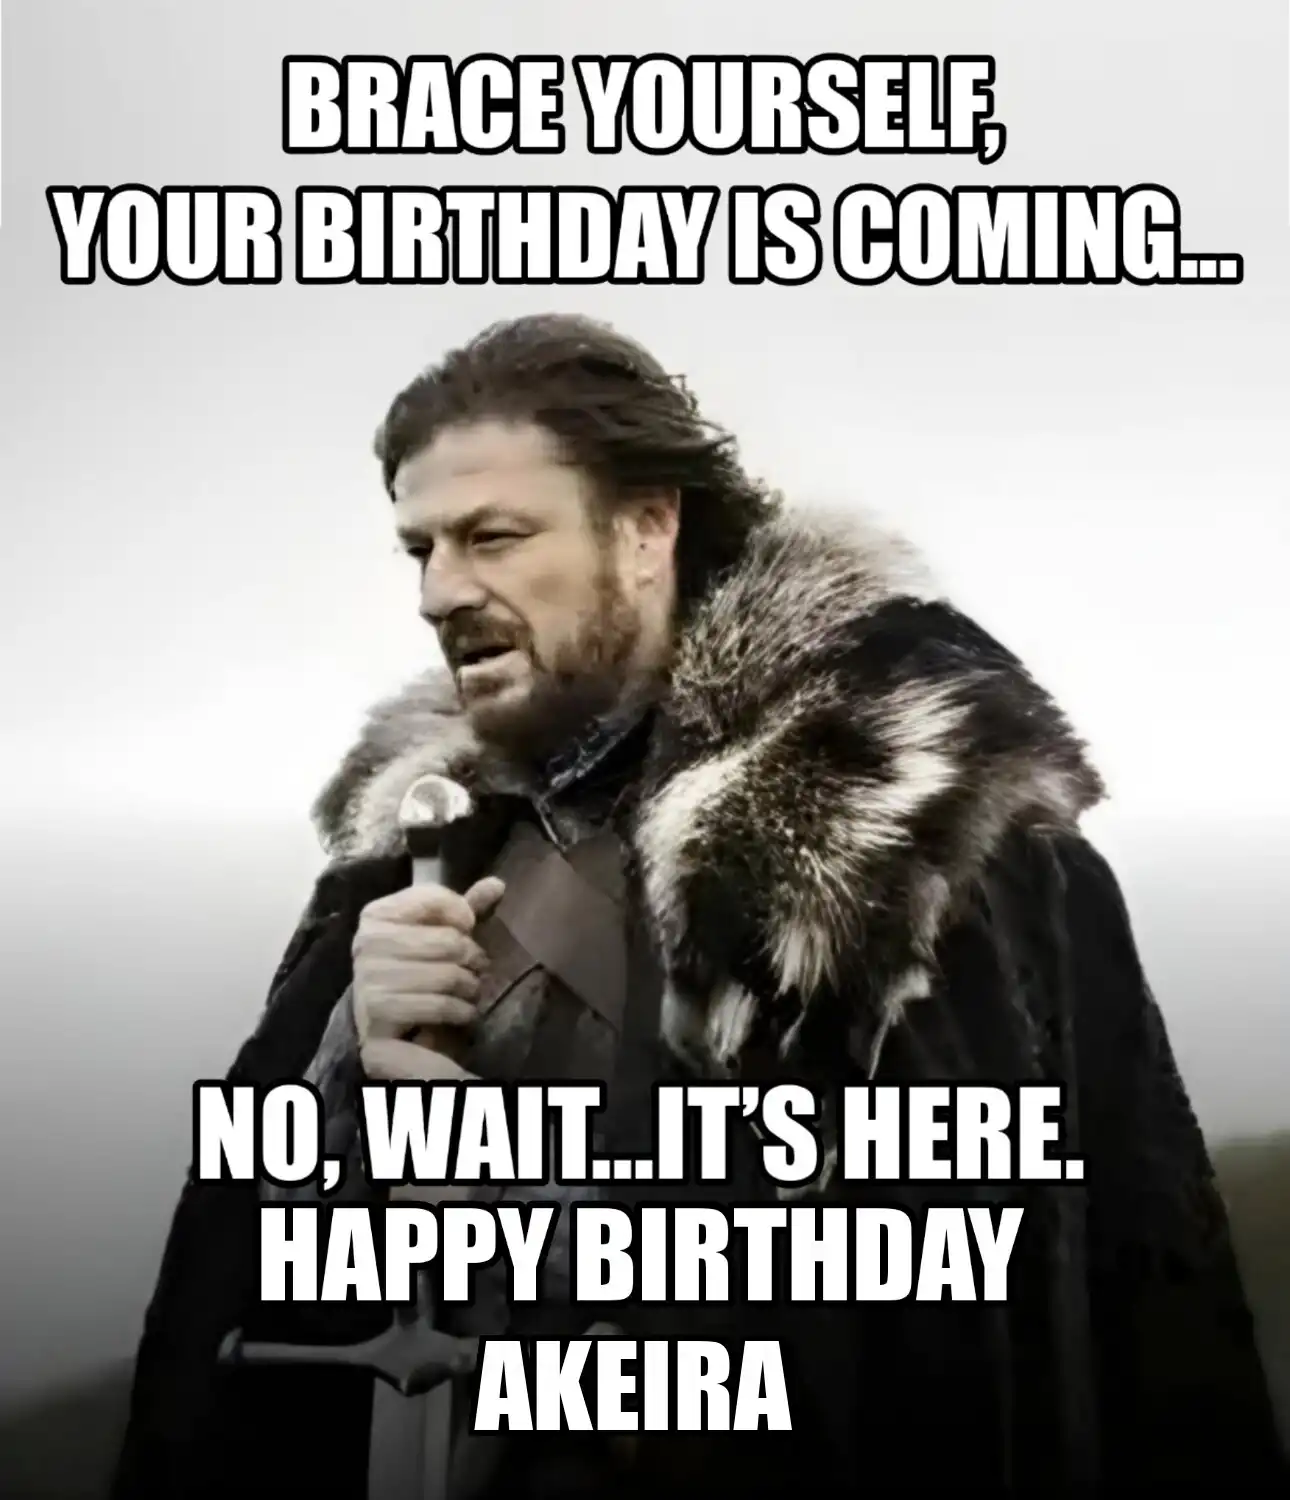 Happy Birthday Akeira Brace Yourself Your Birthday Is Coming Meme